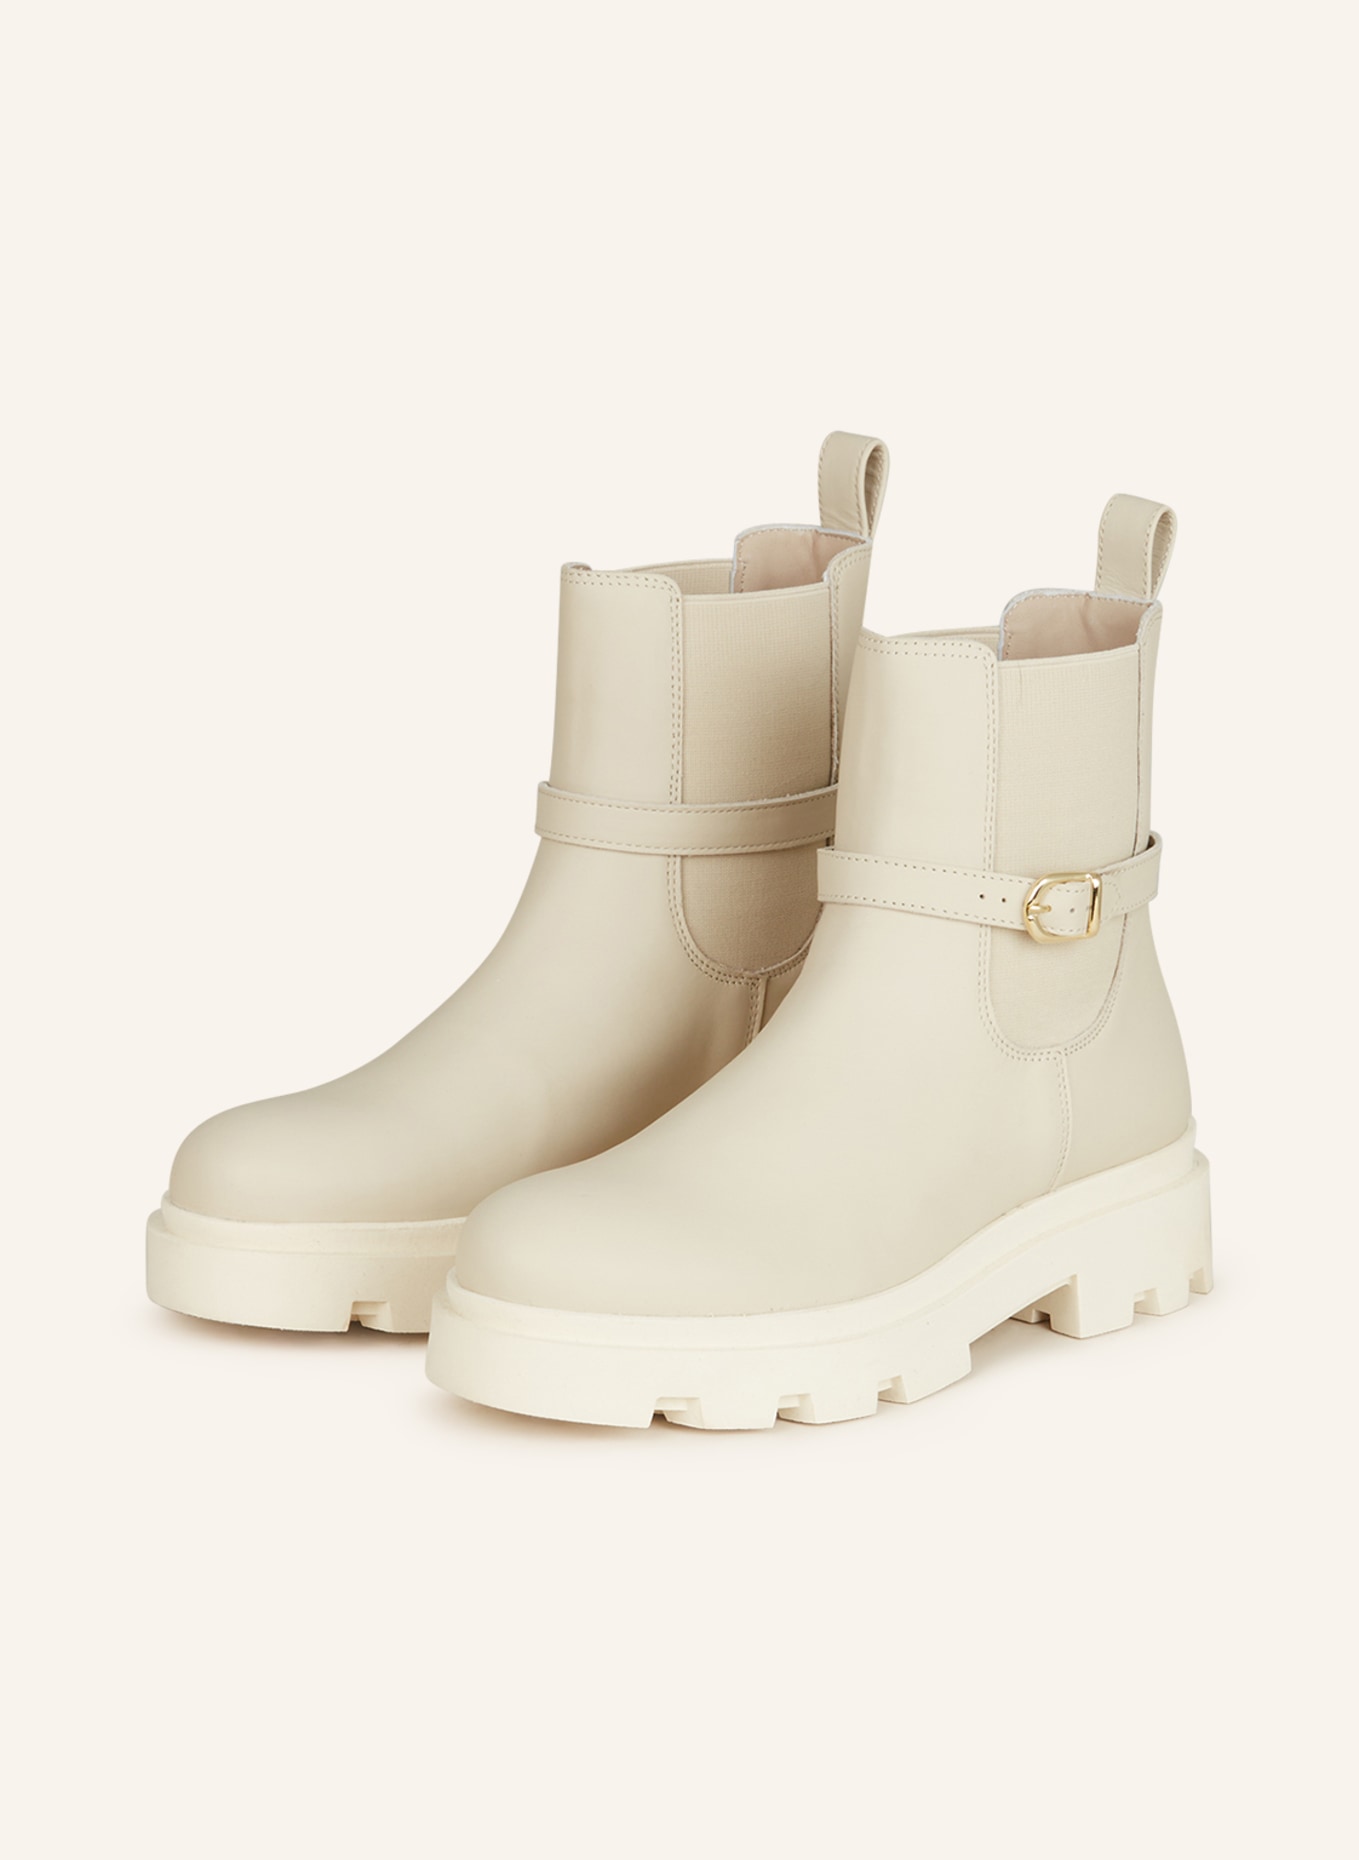 HEY MARLY Chelsea-Boots CLASSY AESTHETIC, Farbe: CREME (Bild 1)